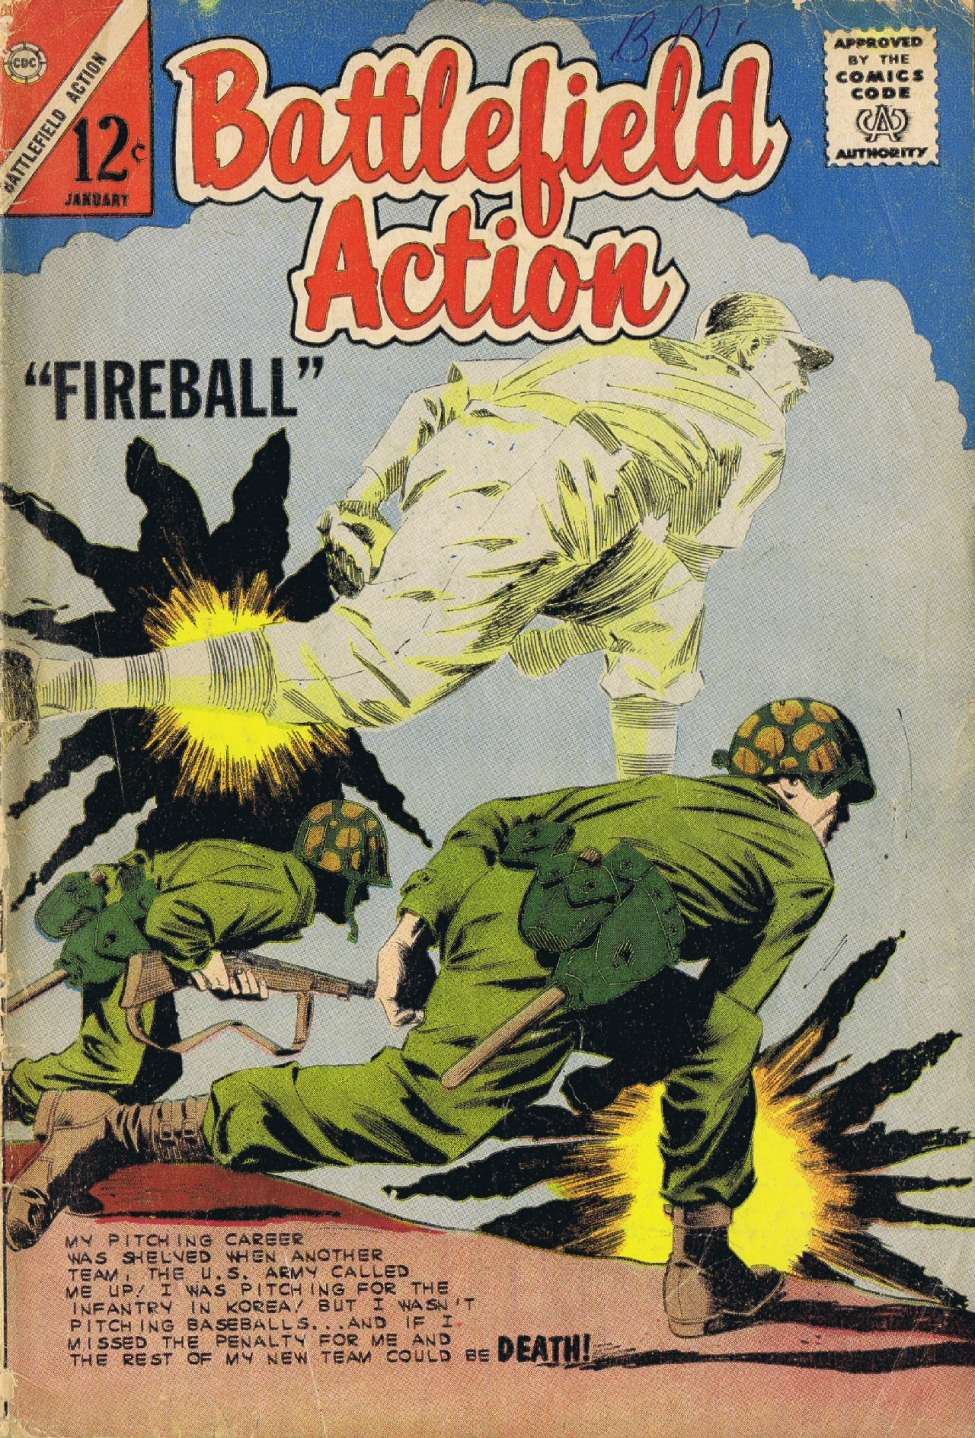 Book Cover For Battlefield Action 51